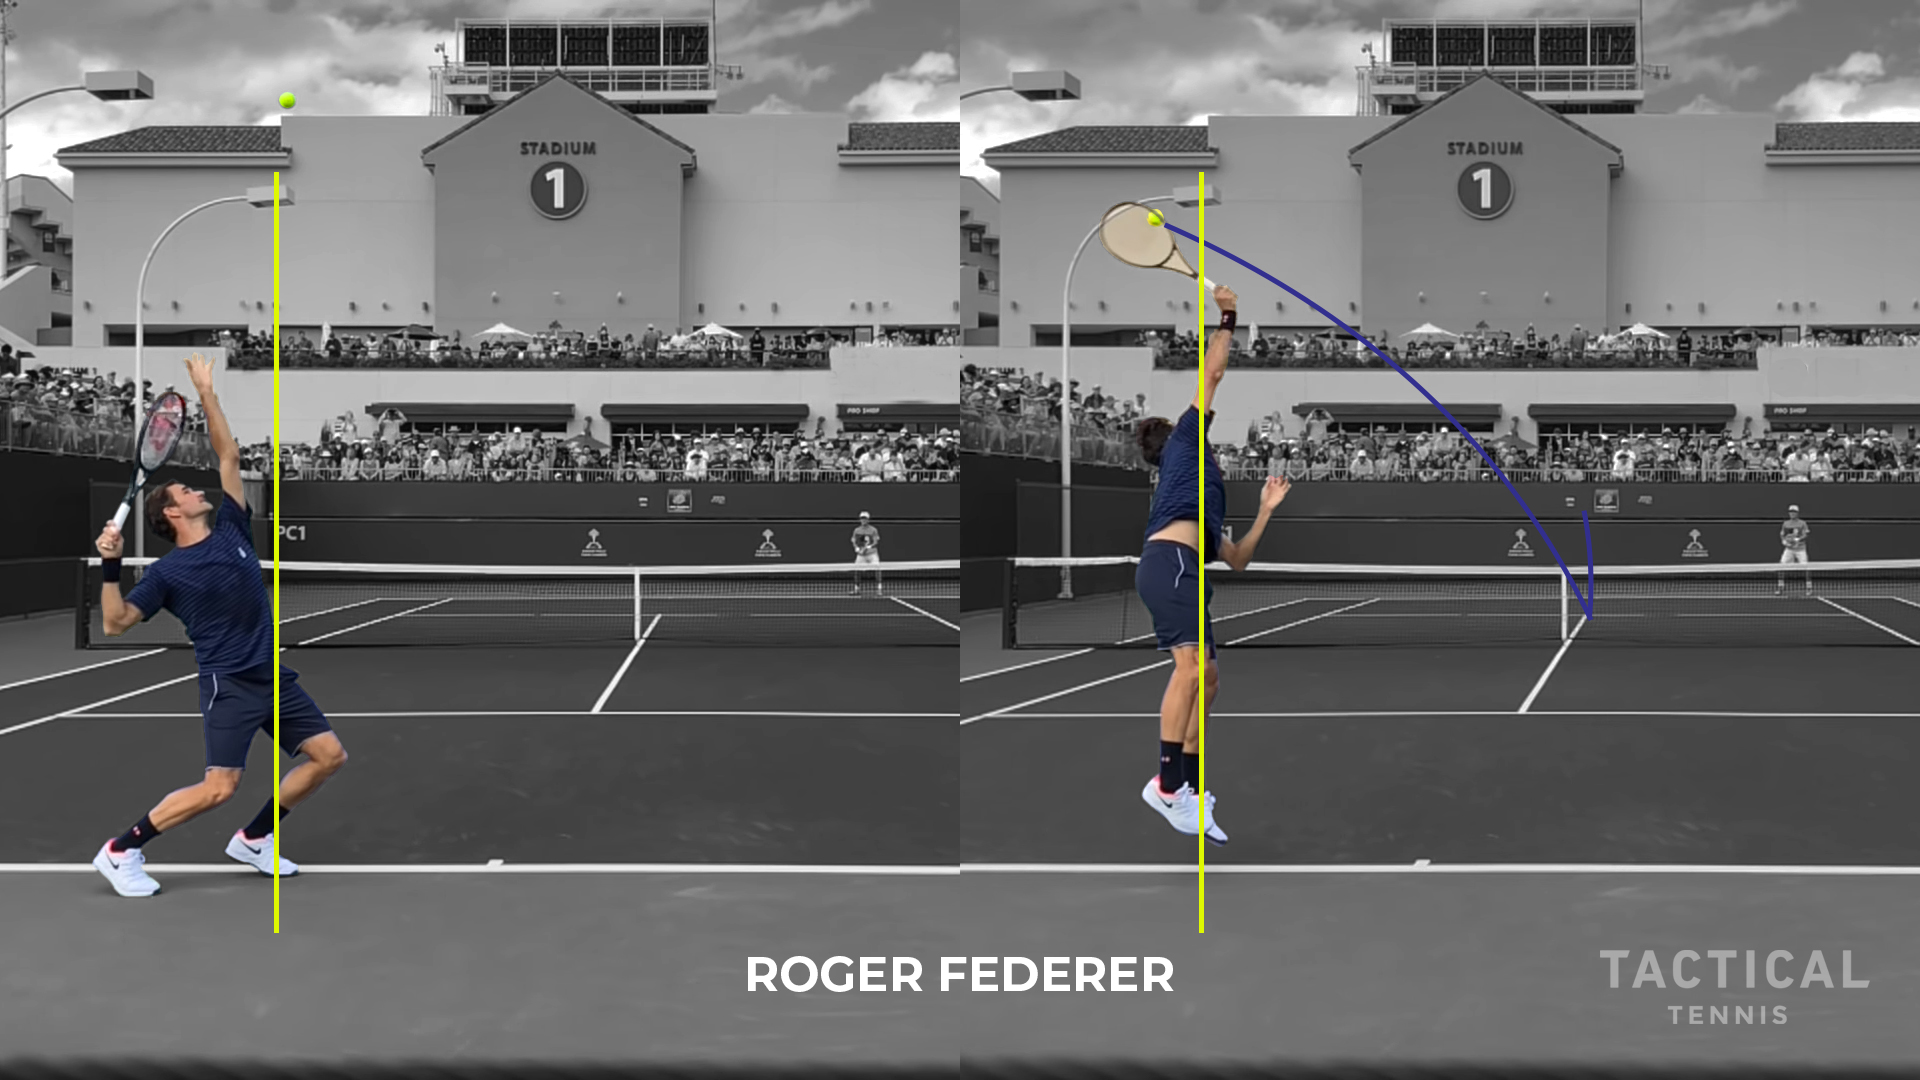 Fededer serve at contact relative to trophy position